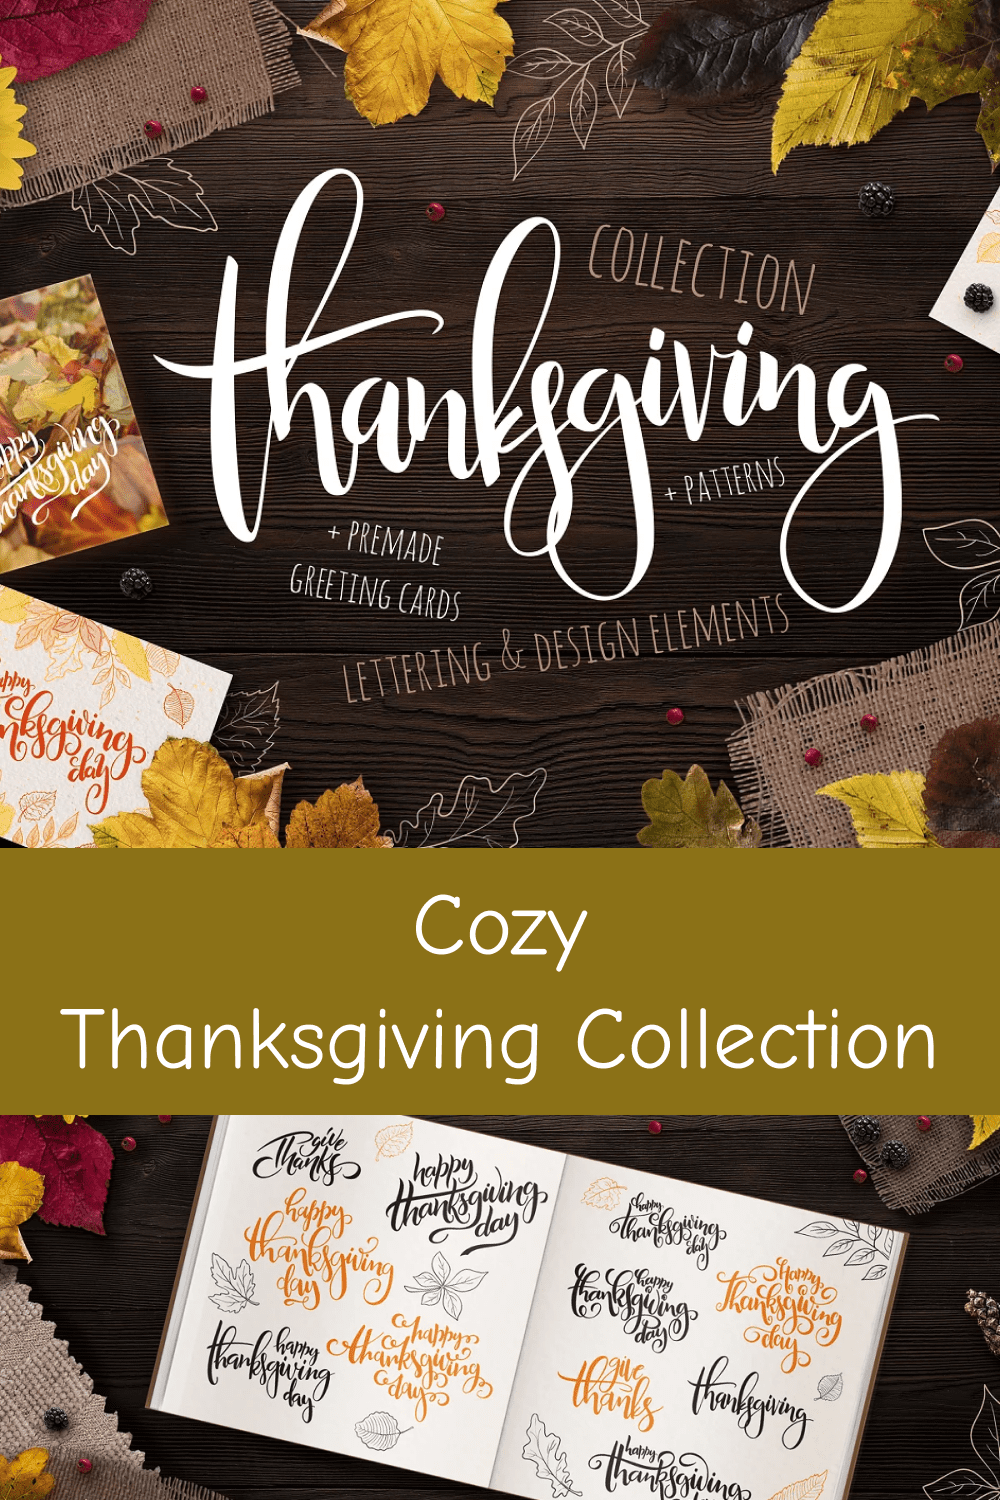 Cozy Thanksgiving Collection.